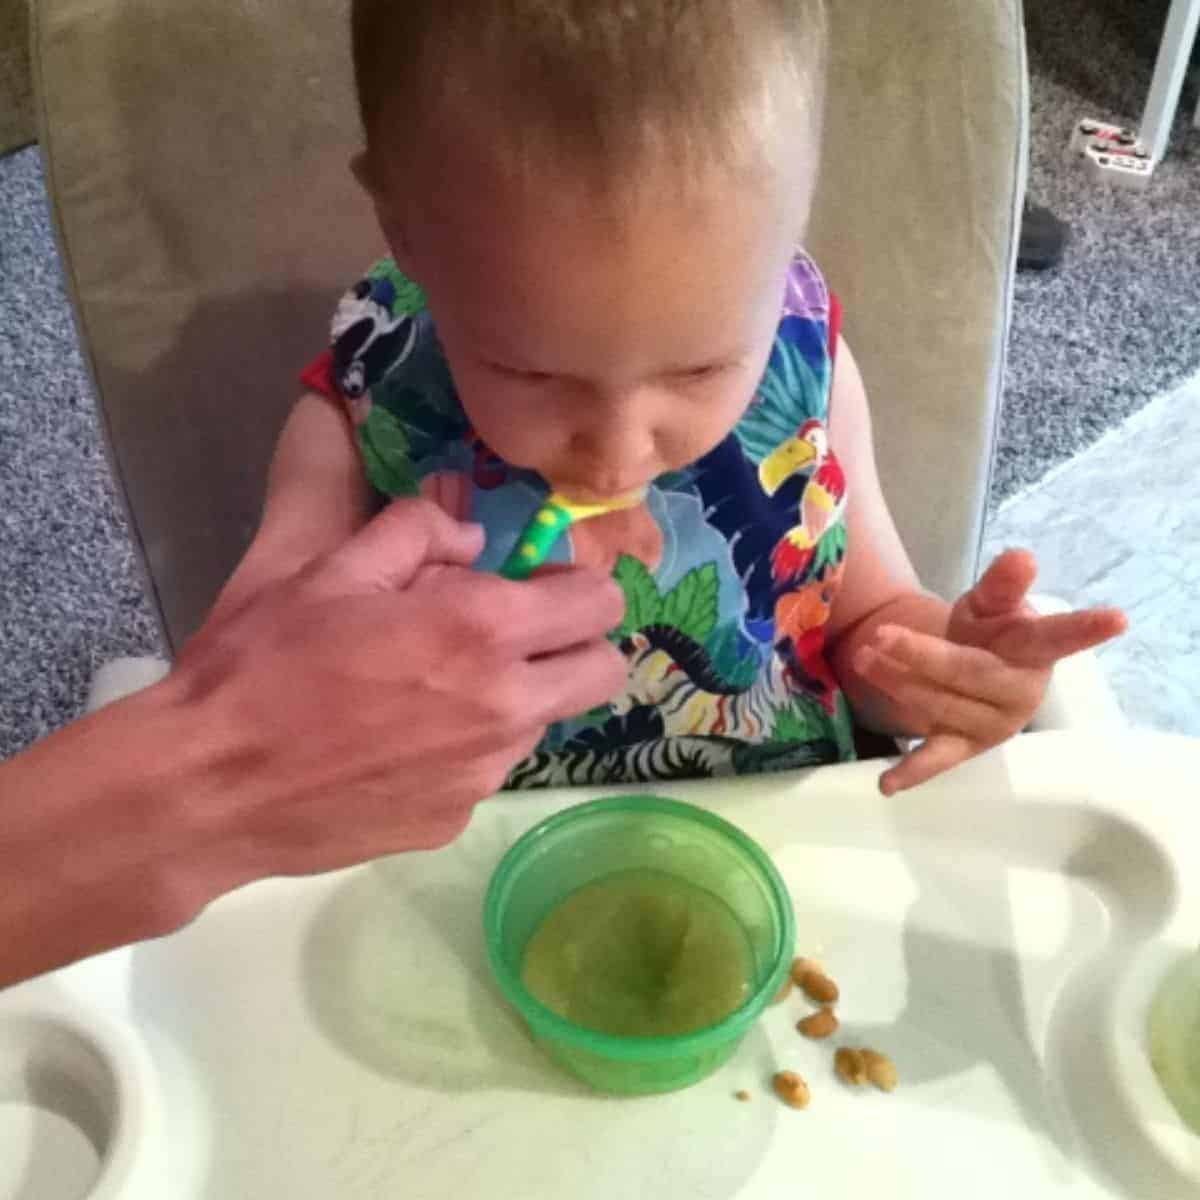 Want your baby or toddler to feed themselves? Follow these easy tips and get the best utensils to use to encourage your baby or toddler to self-feed! 